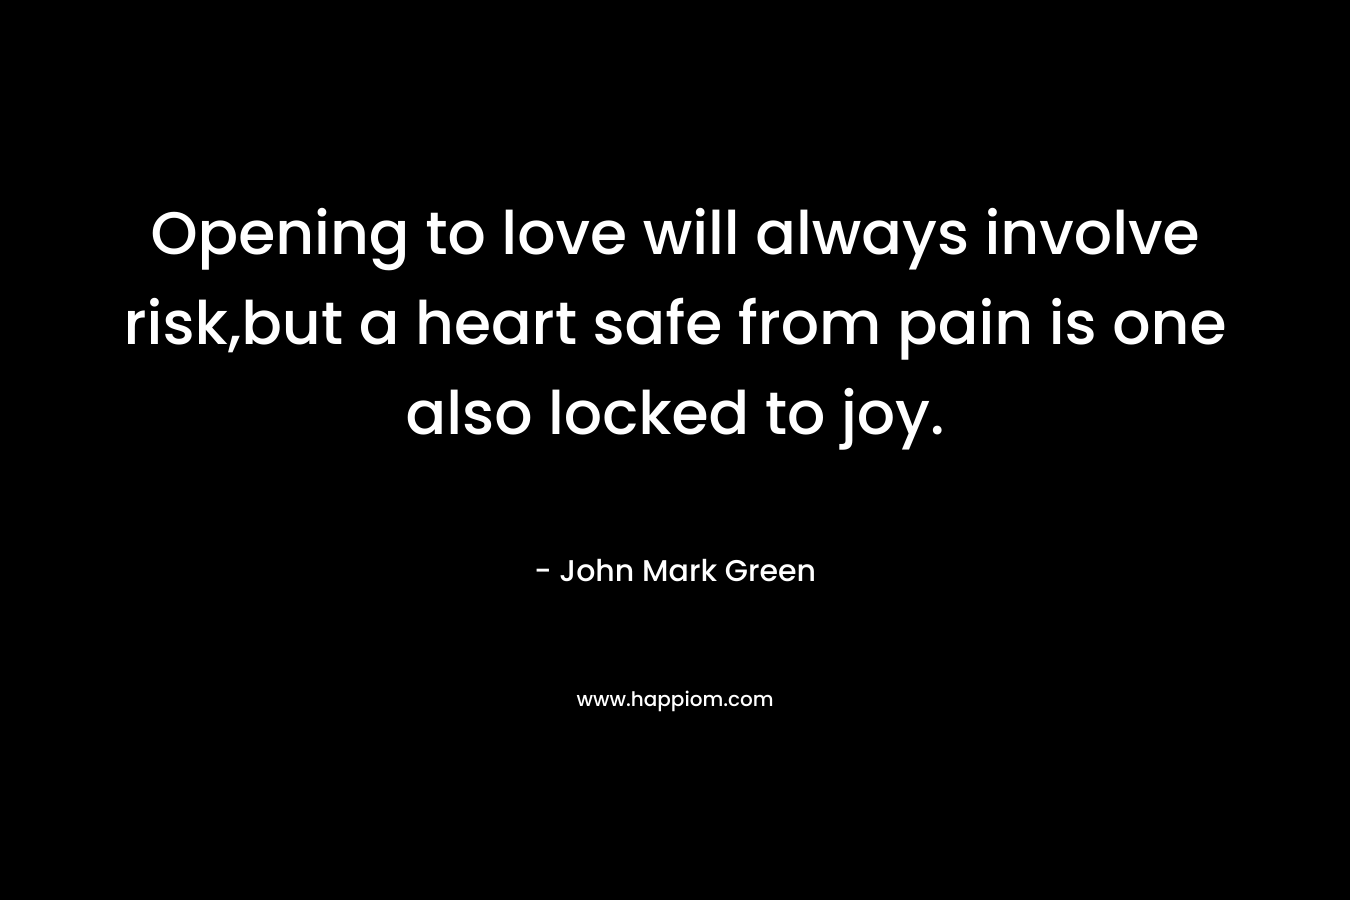 Opening to love will always involve risk,but a heart safe from pain is one also locked to joy.